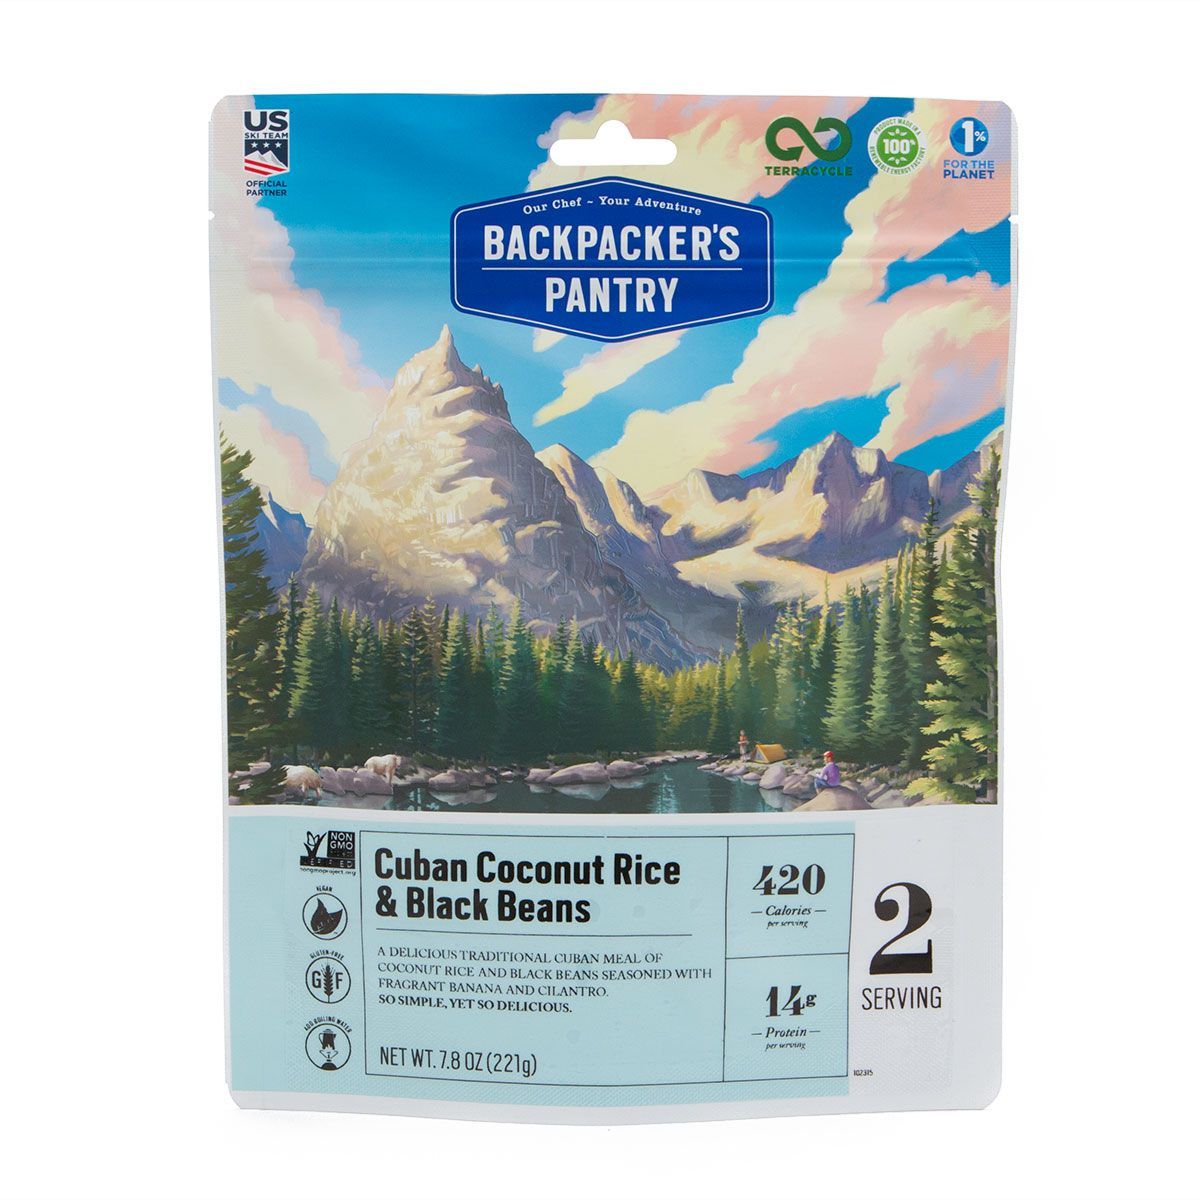 Backpacker's Pantry Cuban Coconut Black Beans & Rice